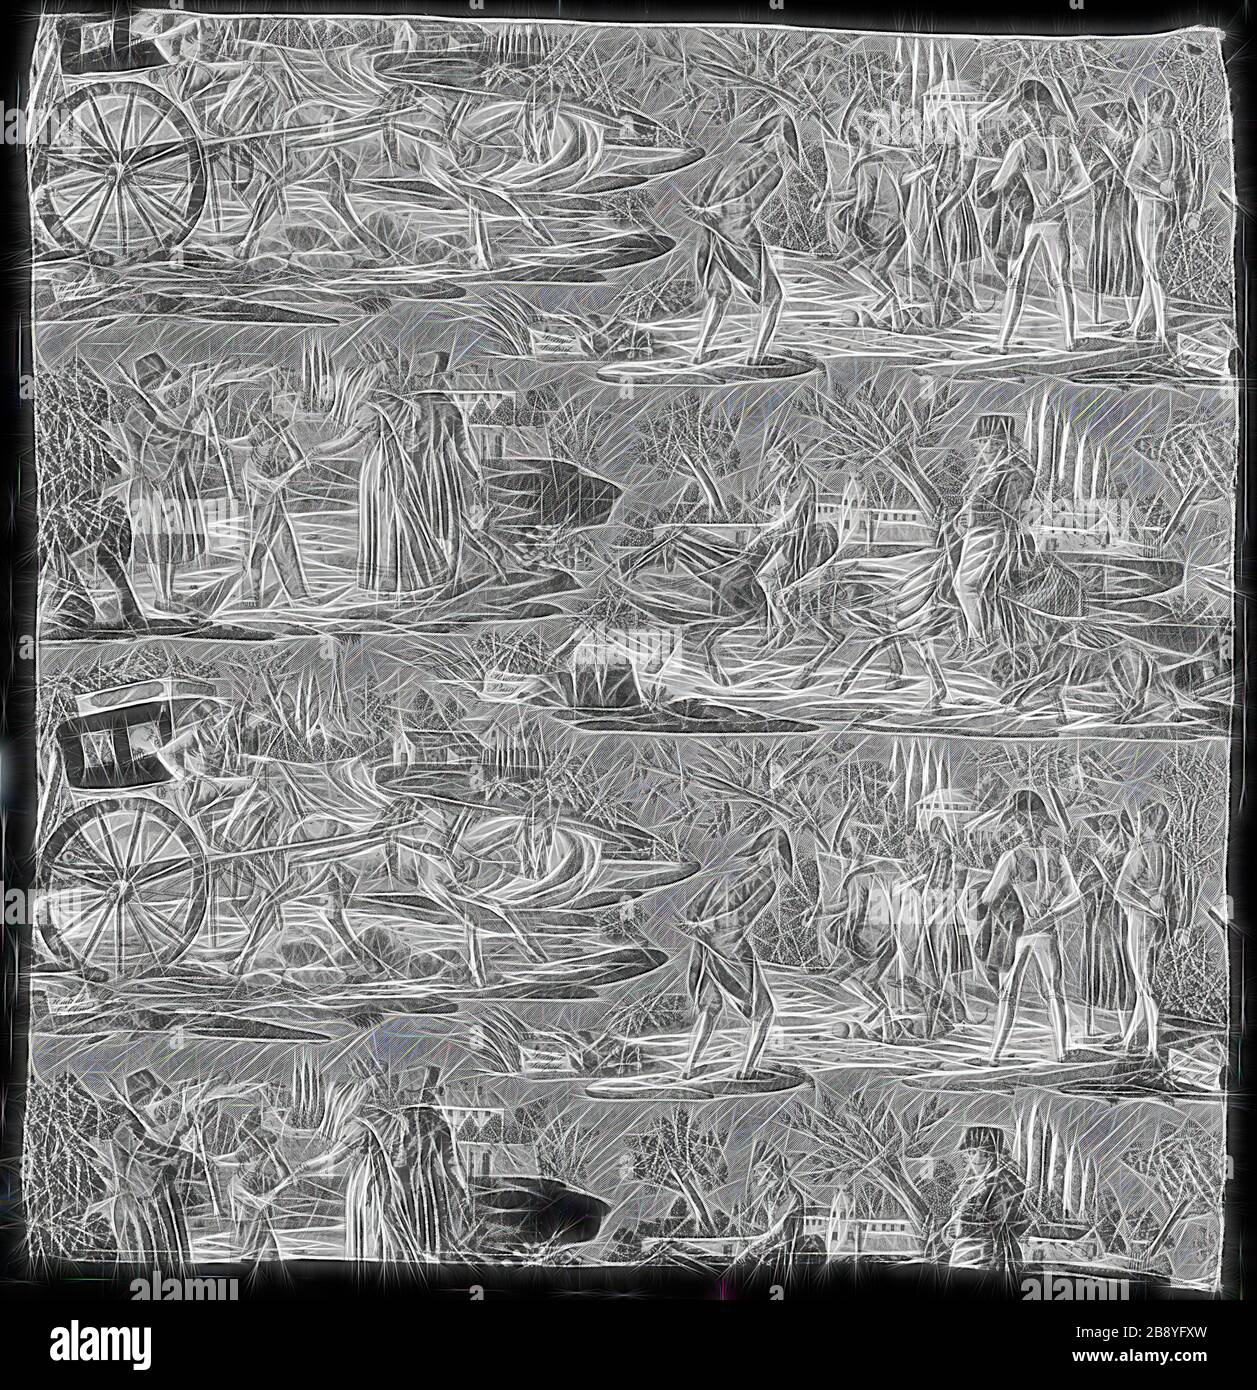 La Route de St. Cloud ou de Poissy (Furnishing Fabric), 1822 or after, Designed by Carle Vernet (French, 1758–1836) and Delmès (French, founded 1815) engraved by Philibert Louis Debucourt (French, 1755-1831) after Carle Vernet (French 1758-1836), Manufactured by Favre Petitpierre et Cie. (French, 1802-1818), France, Nantes, Nantes, Cotton, plain weave, engraved roller printed, 85.1 x 80.5 cm (33 1/2 x 31 5/8 in.), Reimagined by Gibon, design of warm cheerful glowing of brightness and light rays radiance. Classic art reinvented with a modern twist. Photography inspired by futurism, embracing dy Stock Photo